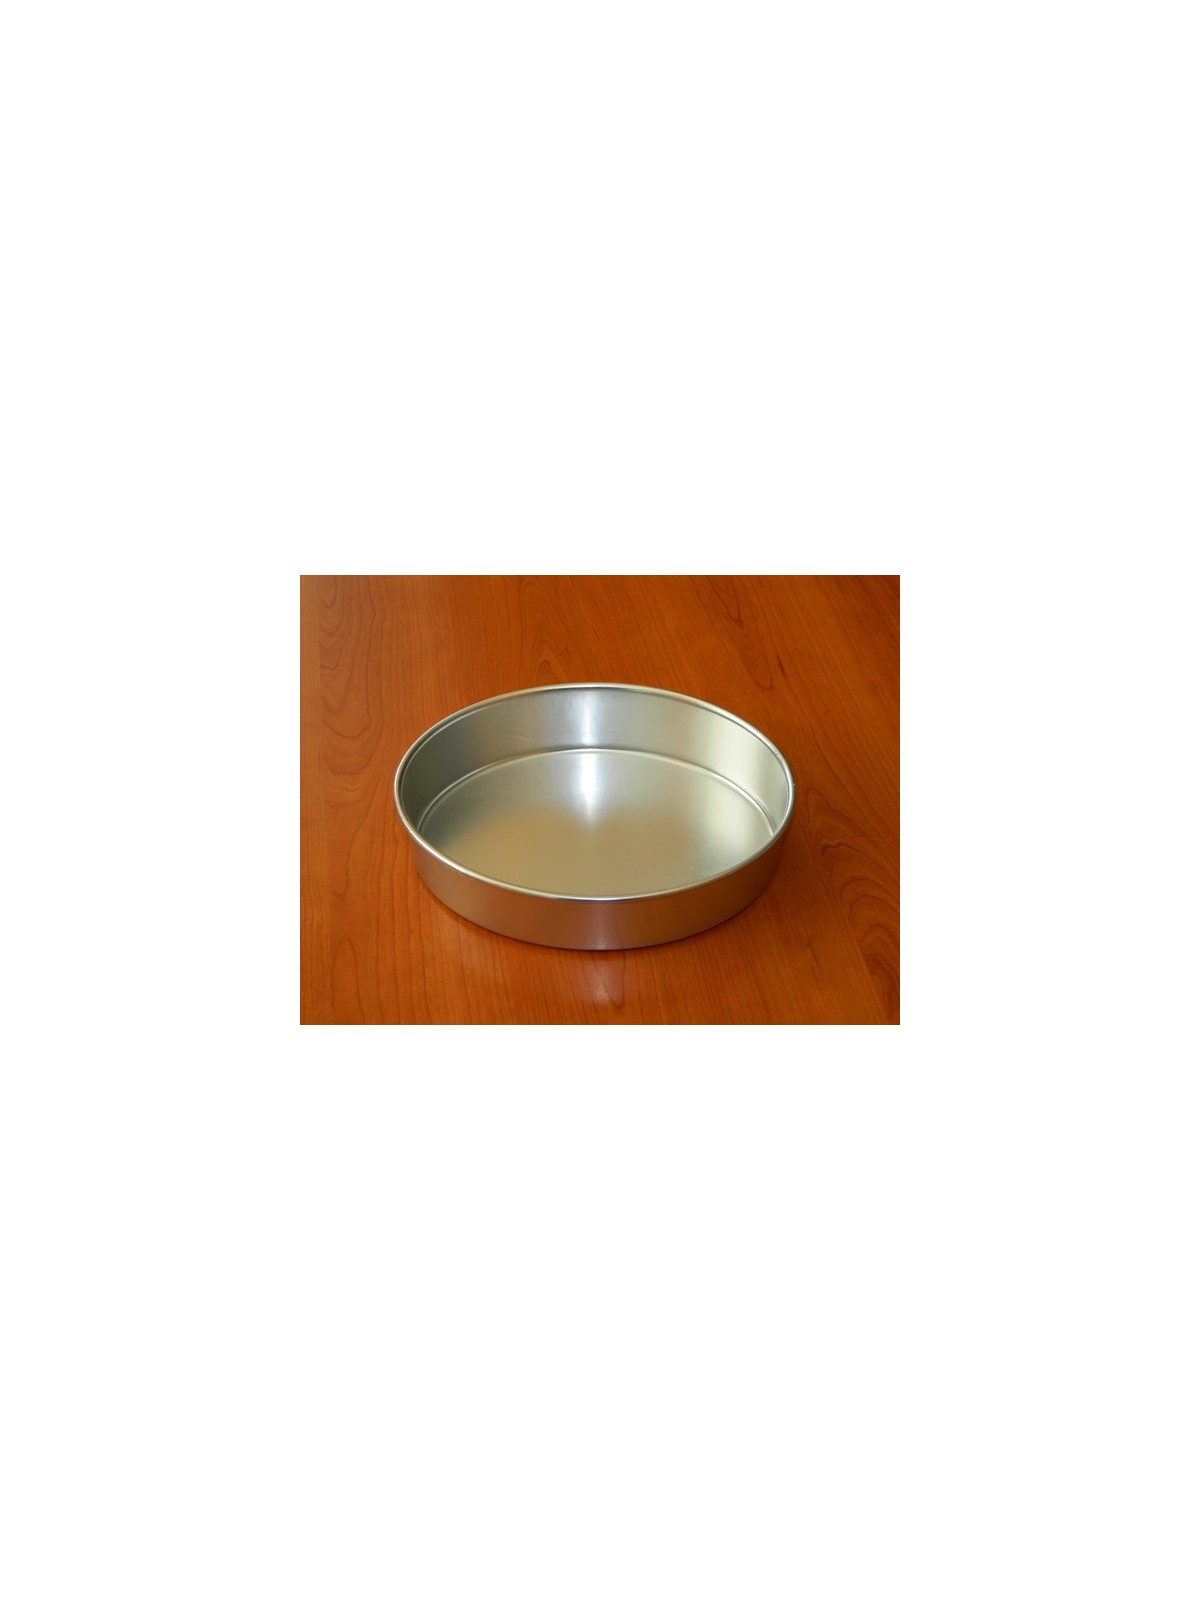 Cake pan for baking - Oval 28cm